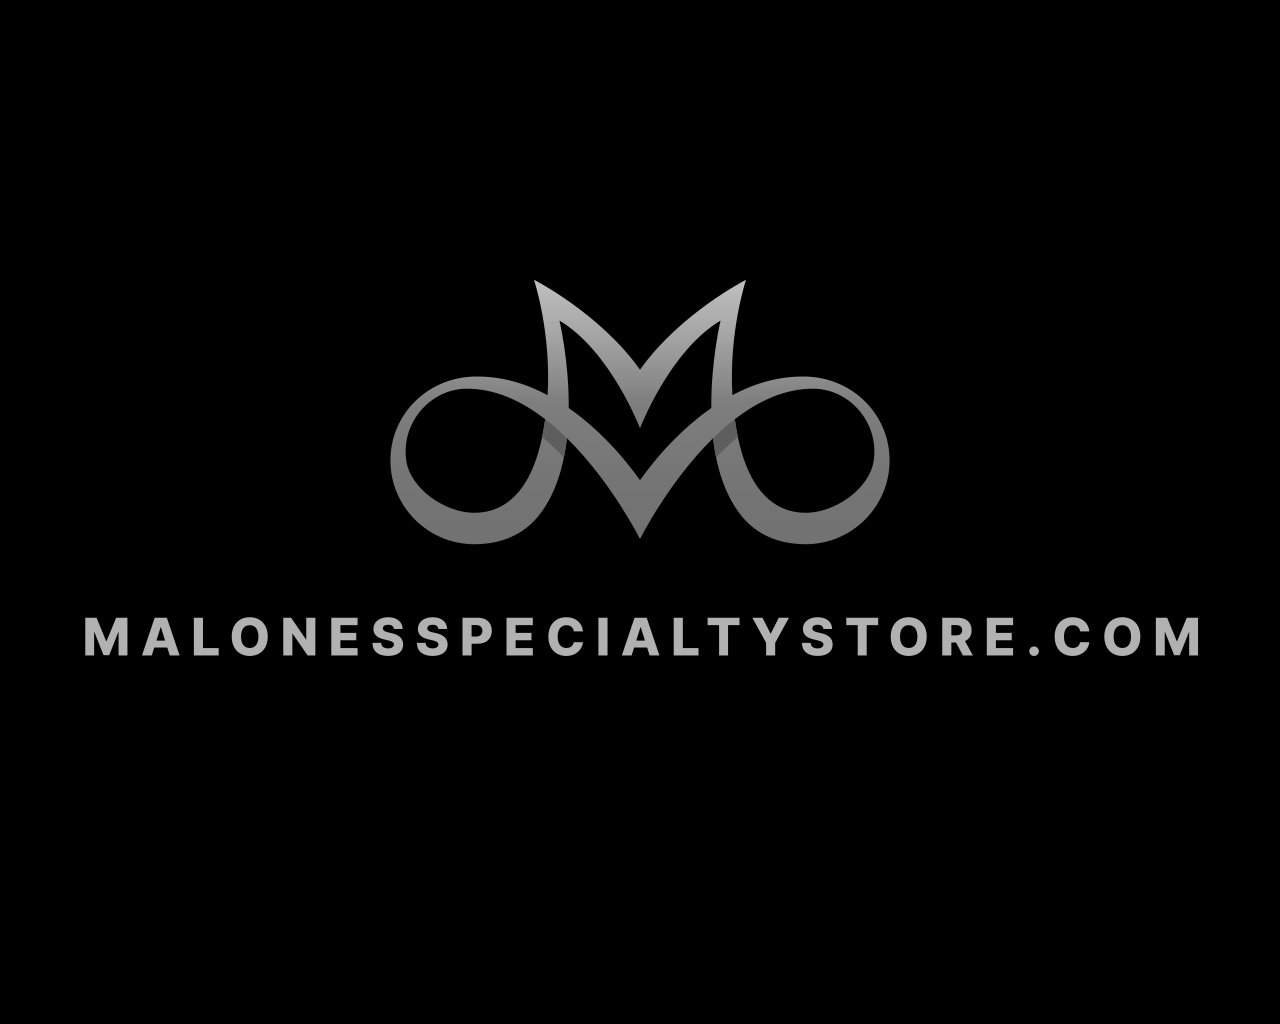 Malonesspecialtystore.com logo white on black. Shop today!